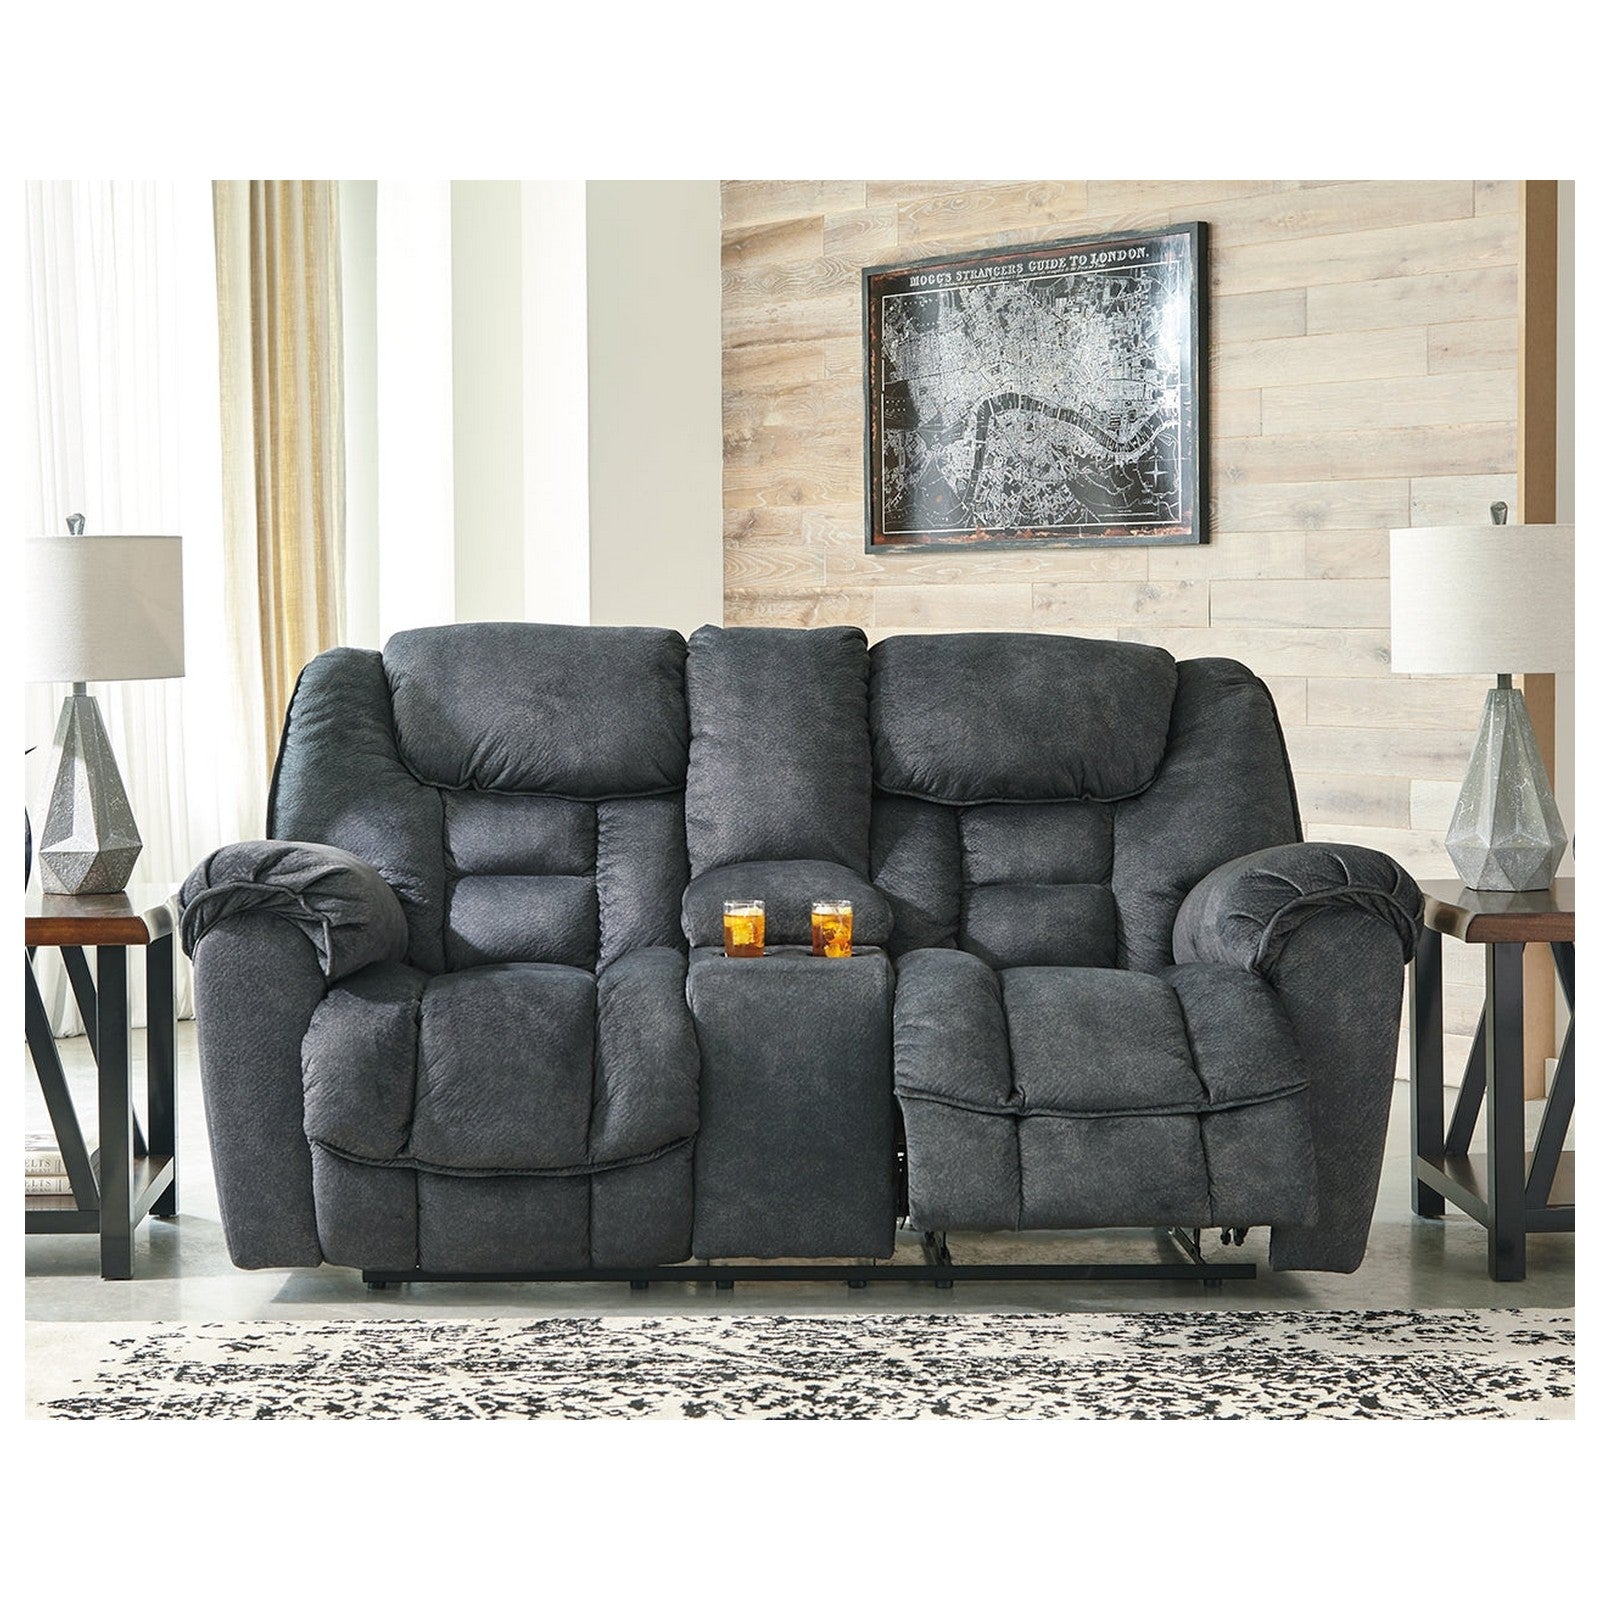 Capehorn Reclining Loveseat with Console Ash-7690294